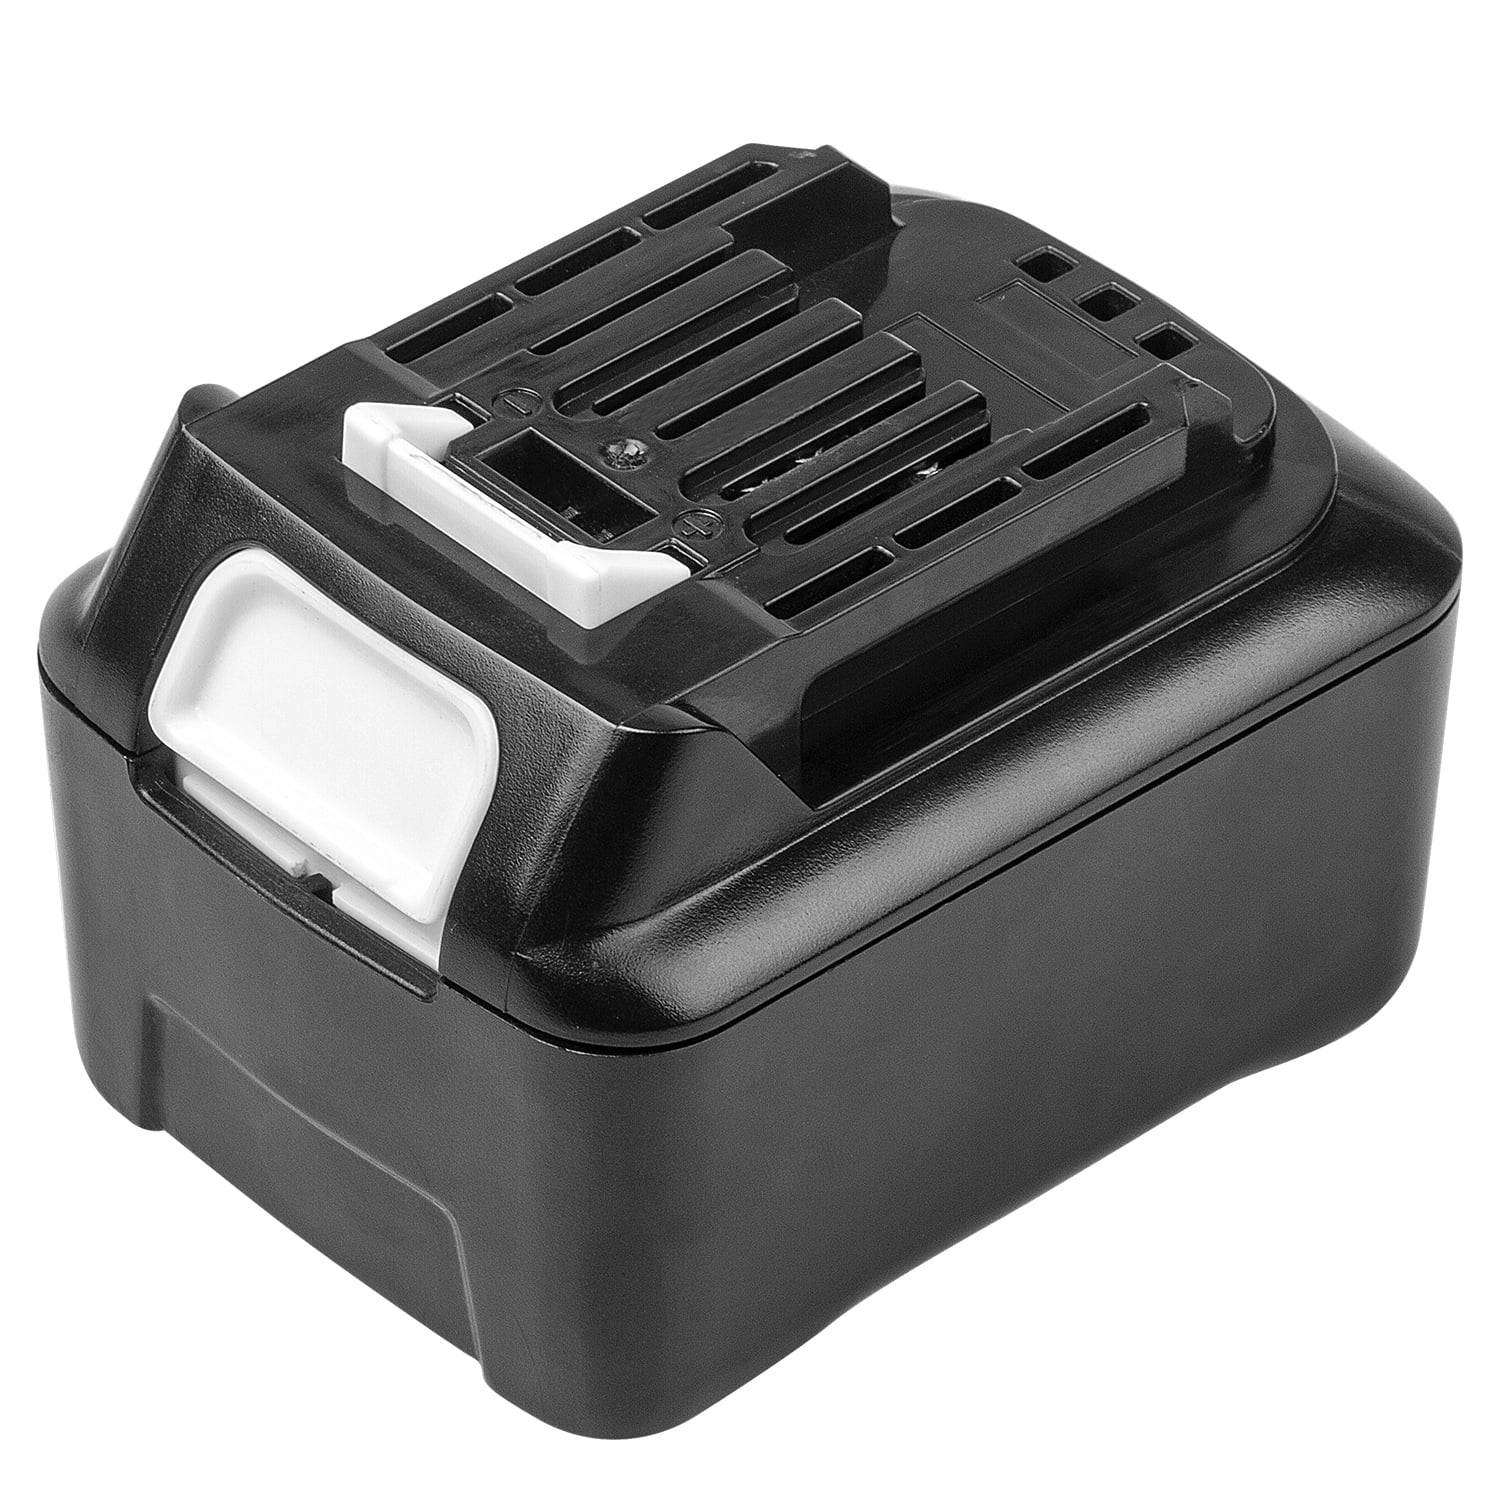 6Ah 12V BL1041 Replacement Battery Compatible with Makita 12V BL1041B BL1021B BL1020B BL1040B DF031D DF0331D TD110D JR103D Cordless Power Tools with Indicator - Walmart.com